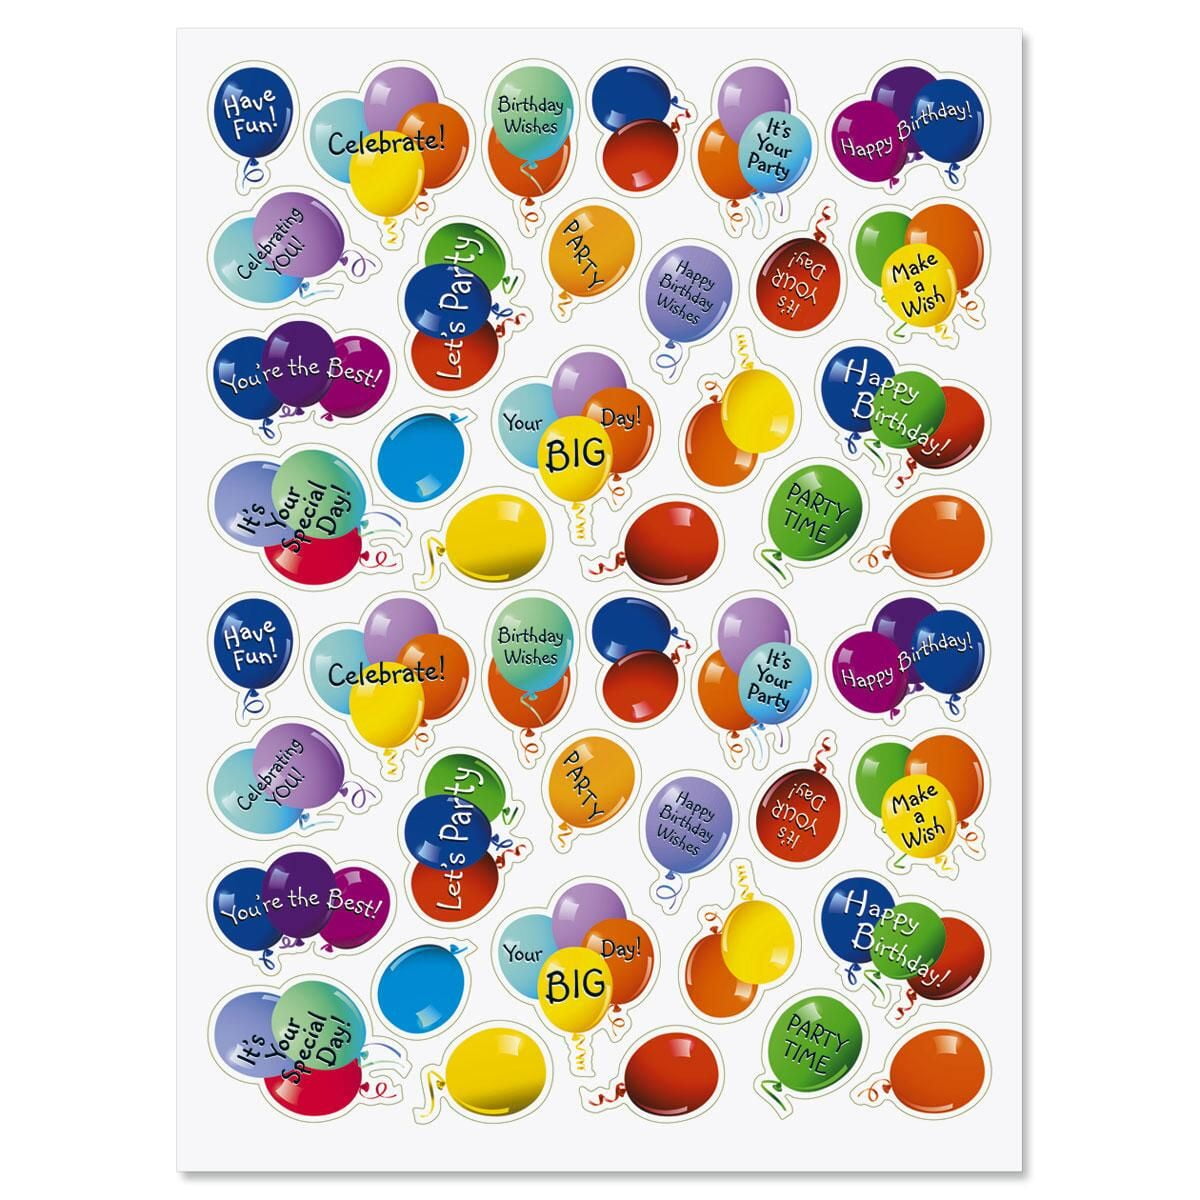 Colorful Celebration Birthday Party Stickers - Set of 92 on 2 Sticker  Sheets, Happy Birthday Stickers, Birthday Party Stickers